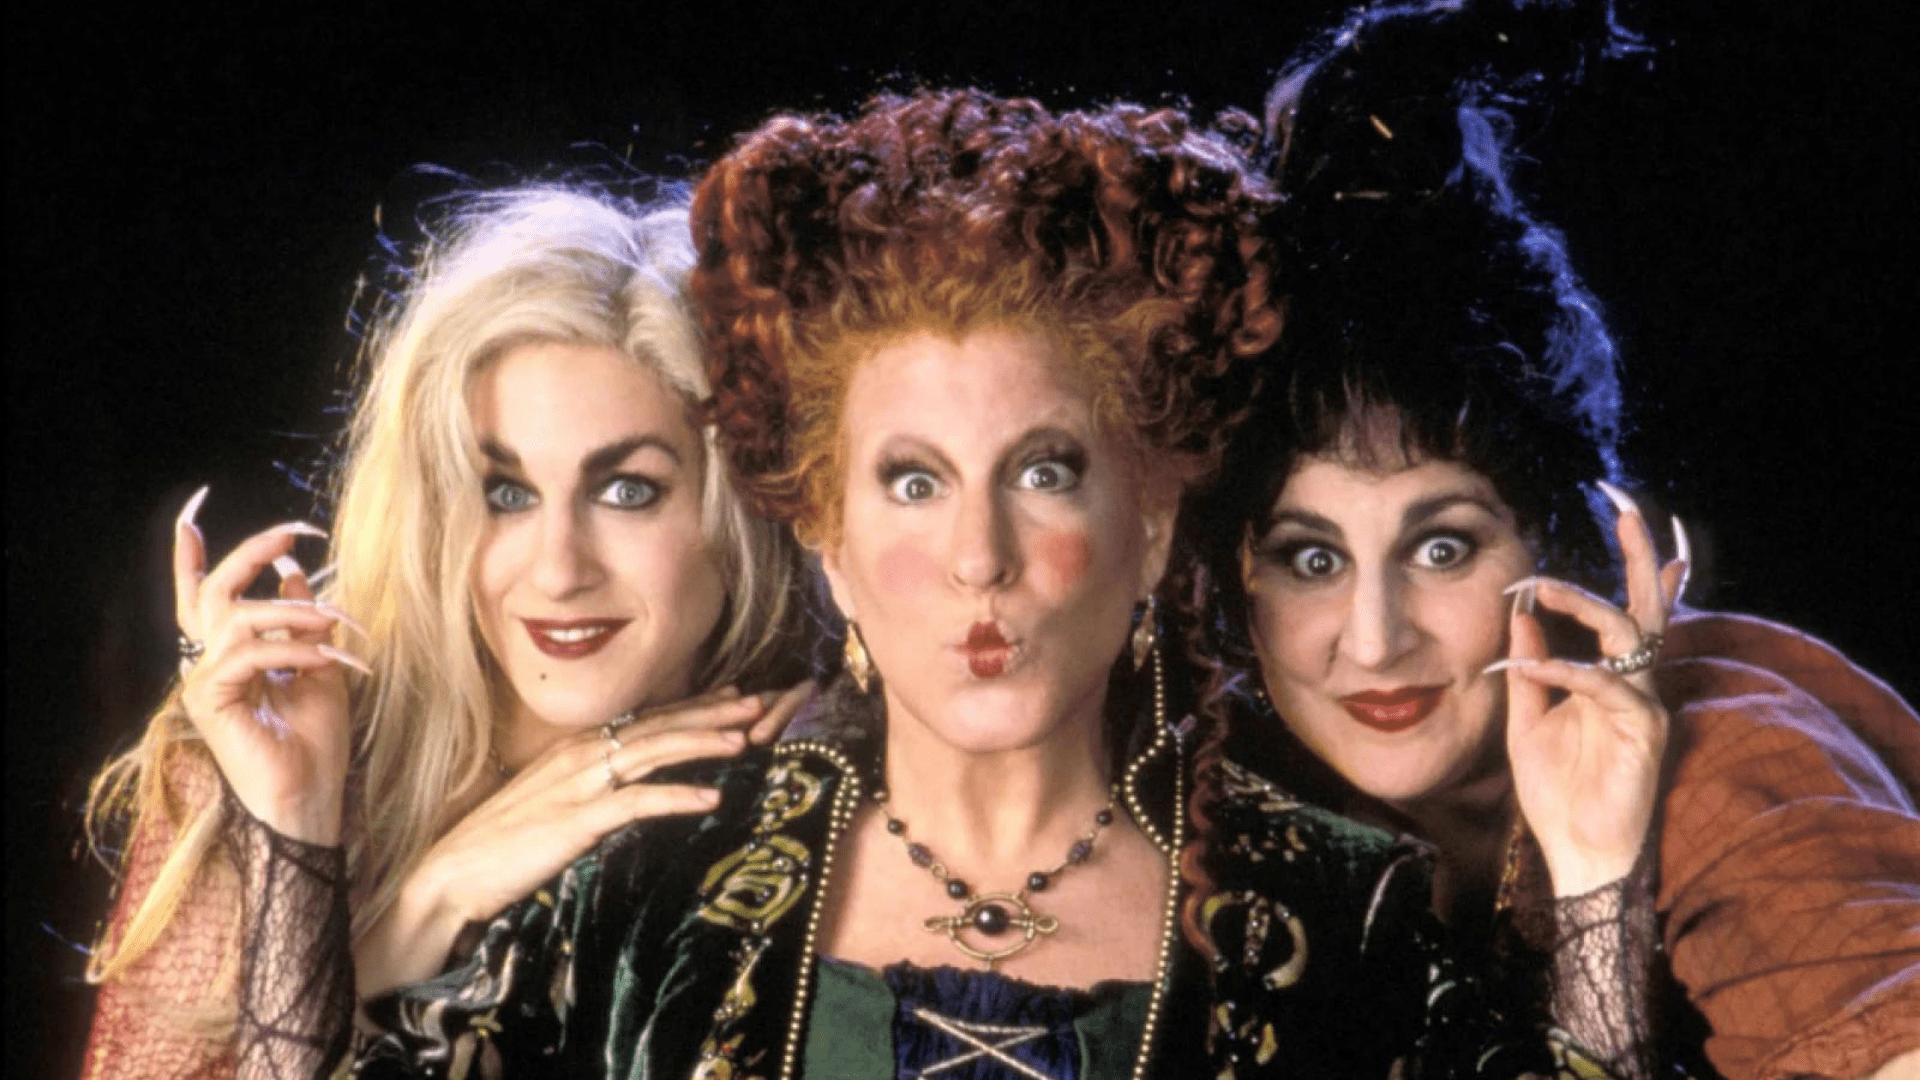 Hocus Pocus Facts - 37 Facts About Hocus Pocus (1993) That You Haven’t Heard Before